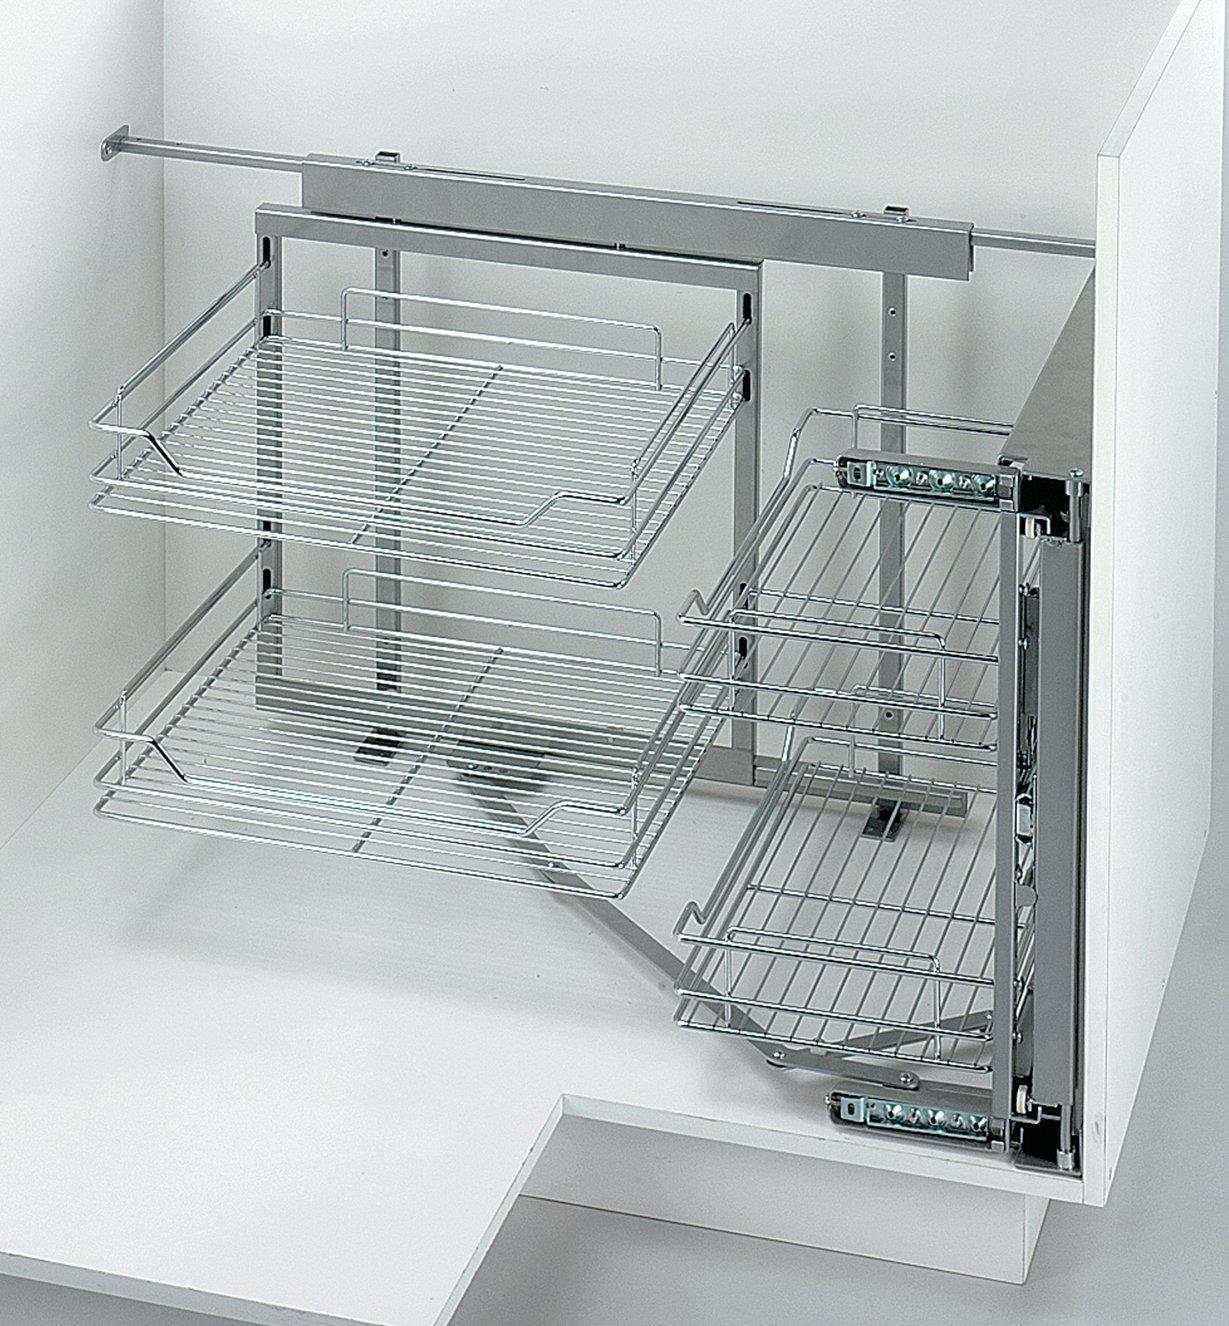 Example of Blind Corner Unit mounted in a cabinet